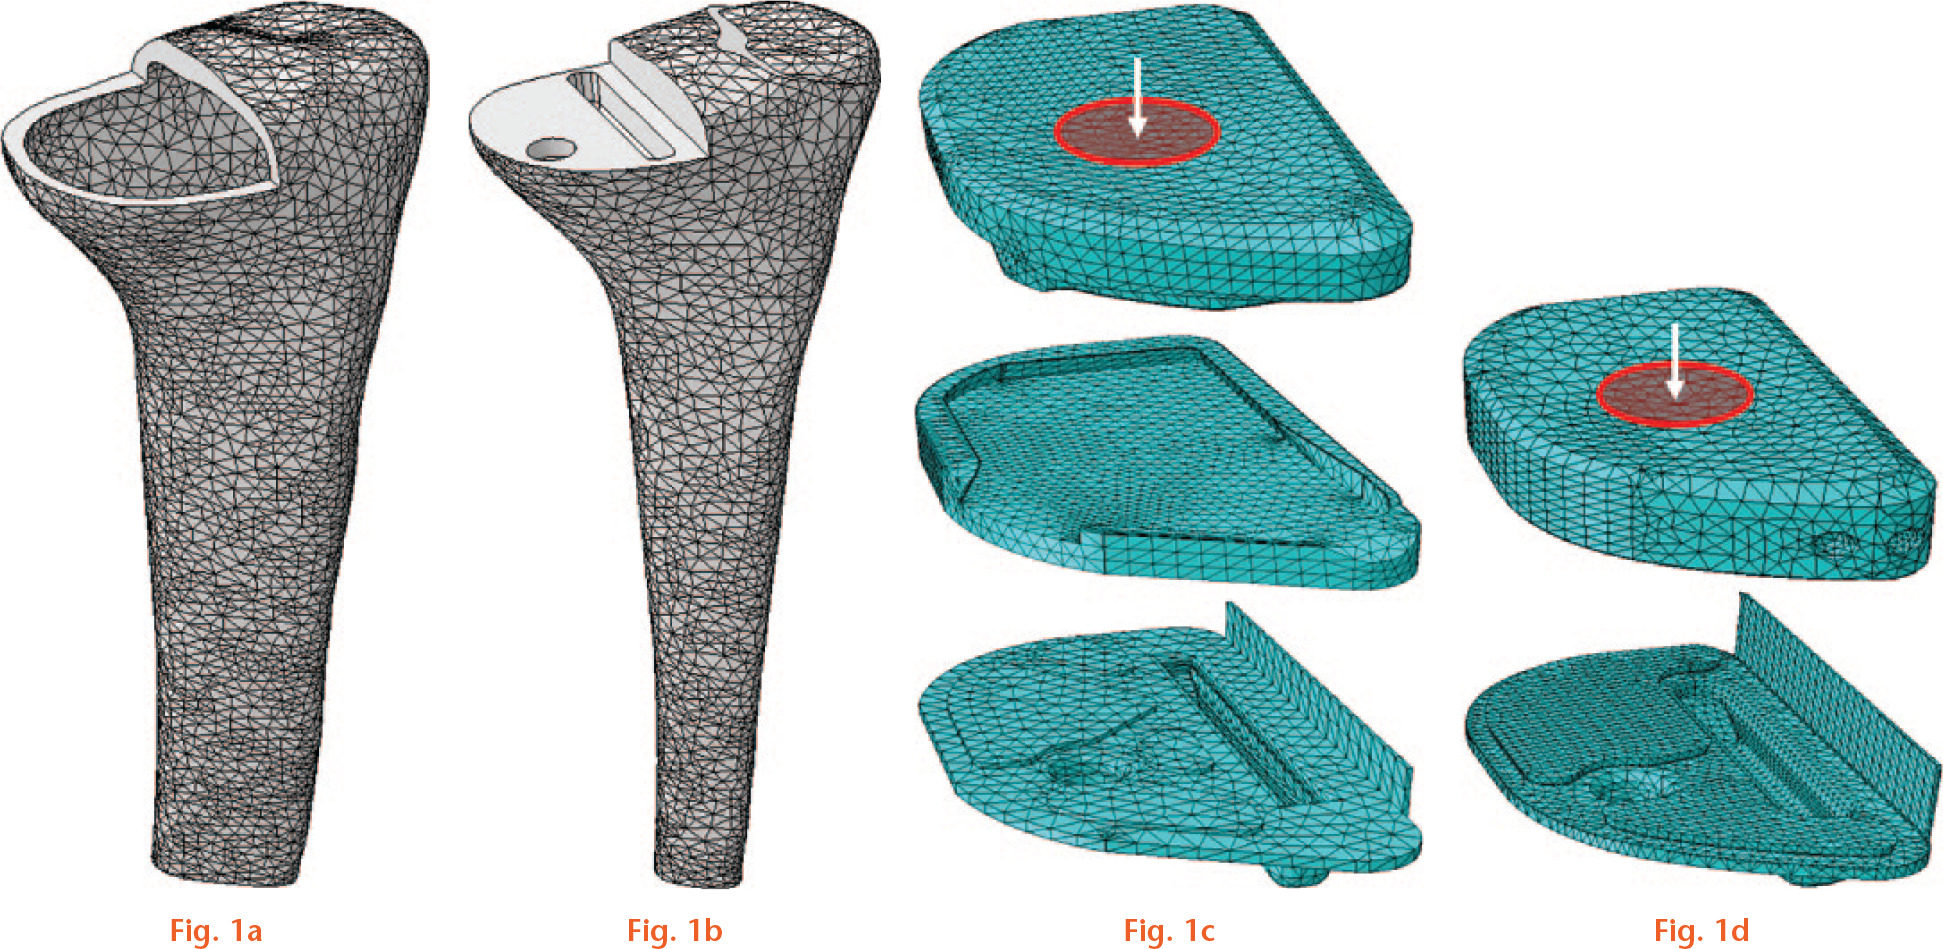  
          The finite element model: a) cortical bone part; b) cancellous bone part; c) metal-backed implant (polyethylene, metal tray) and cement meshes; and d) all-polyethylene implant and cement mesh. The area of distributed load is highlighted.
        